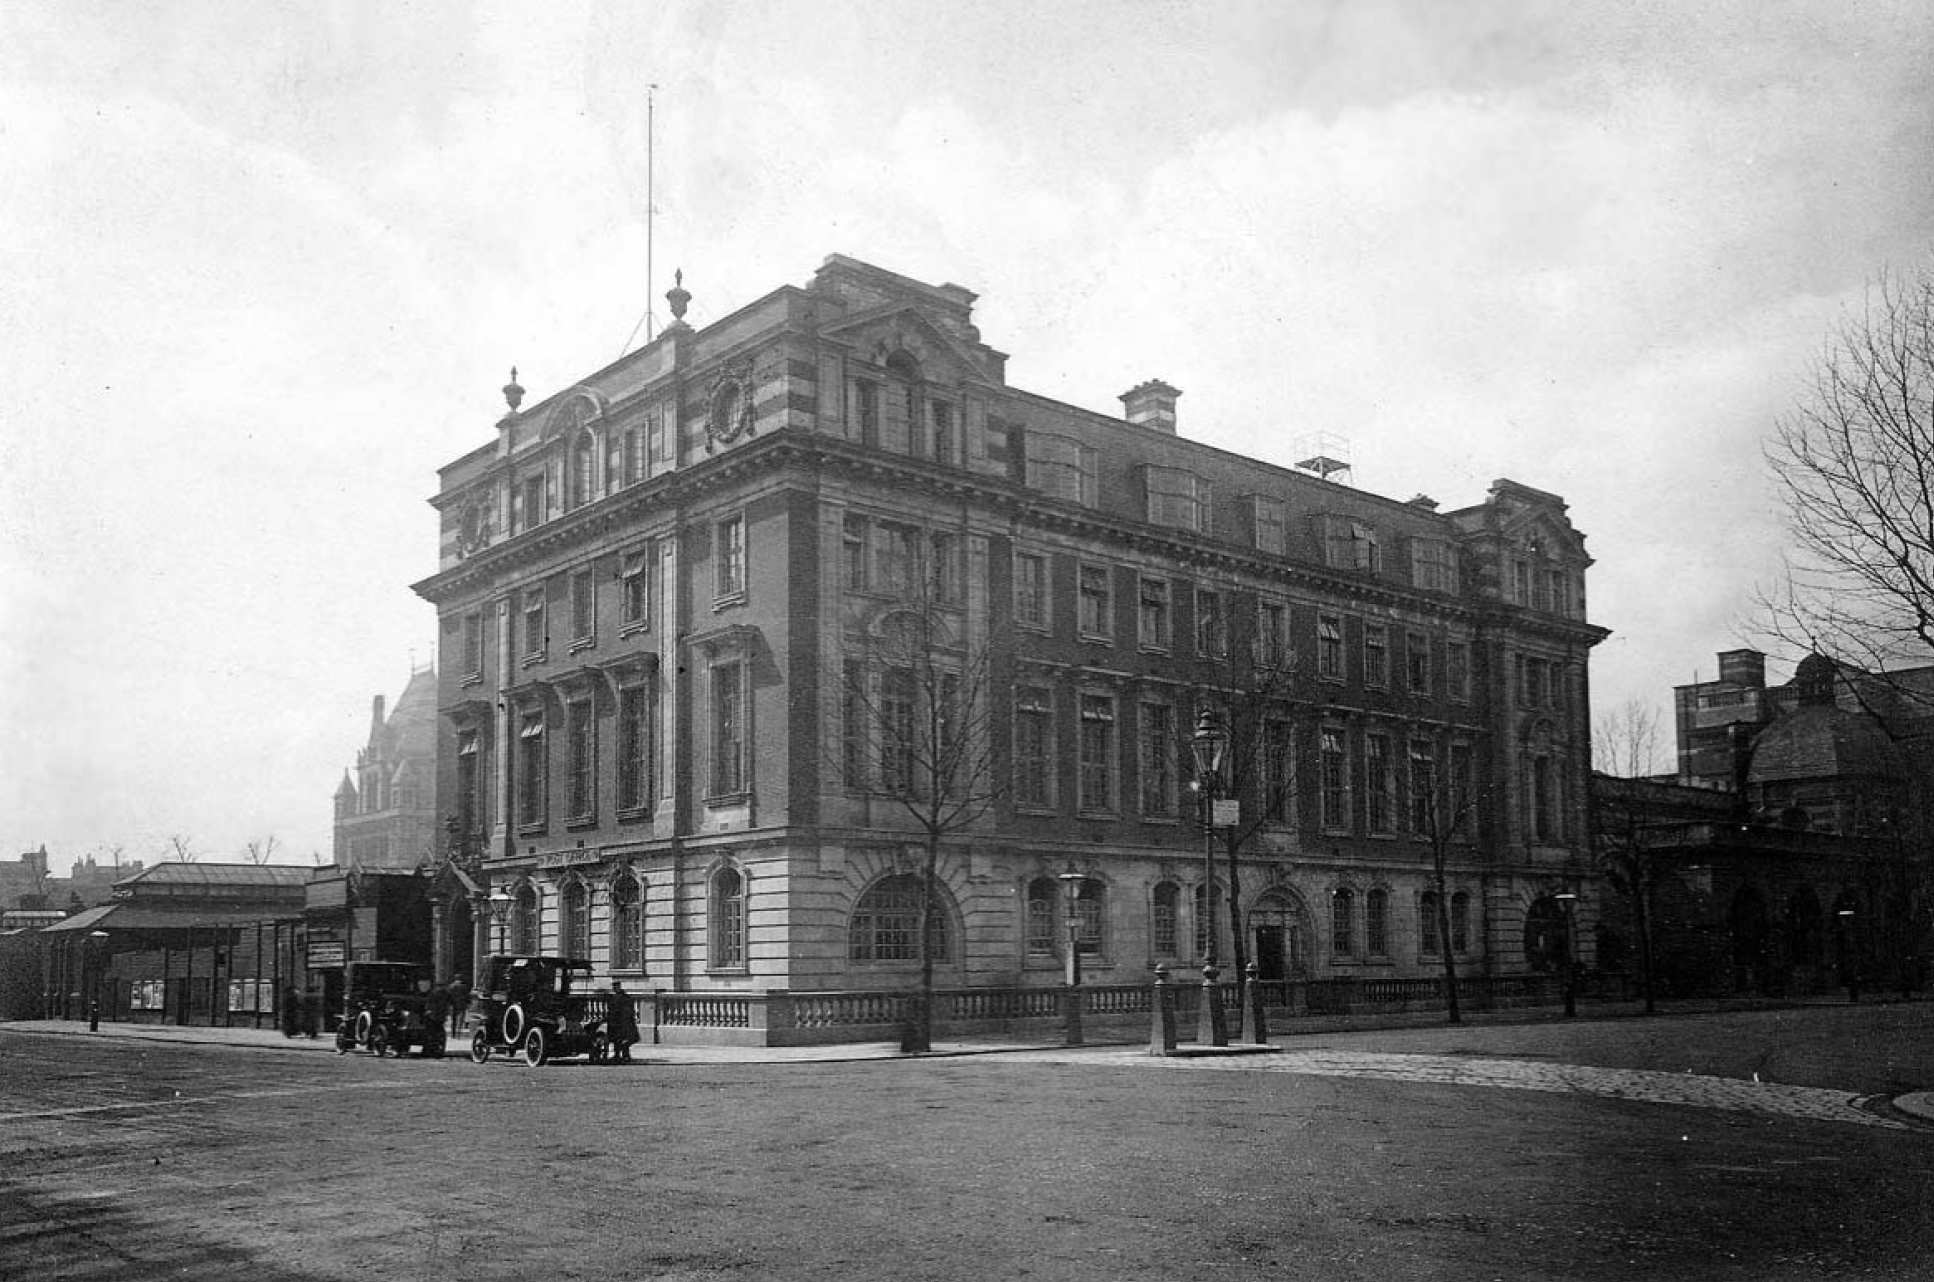 The Meteorological Office headquarters, Exhibition Road, South Kensington. This was the headquarters from November 1910 until November 1919.